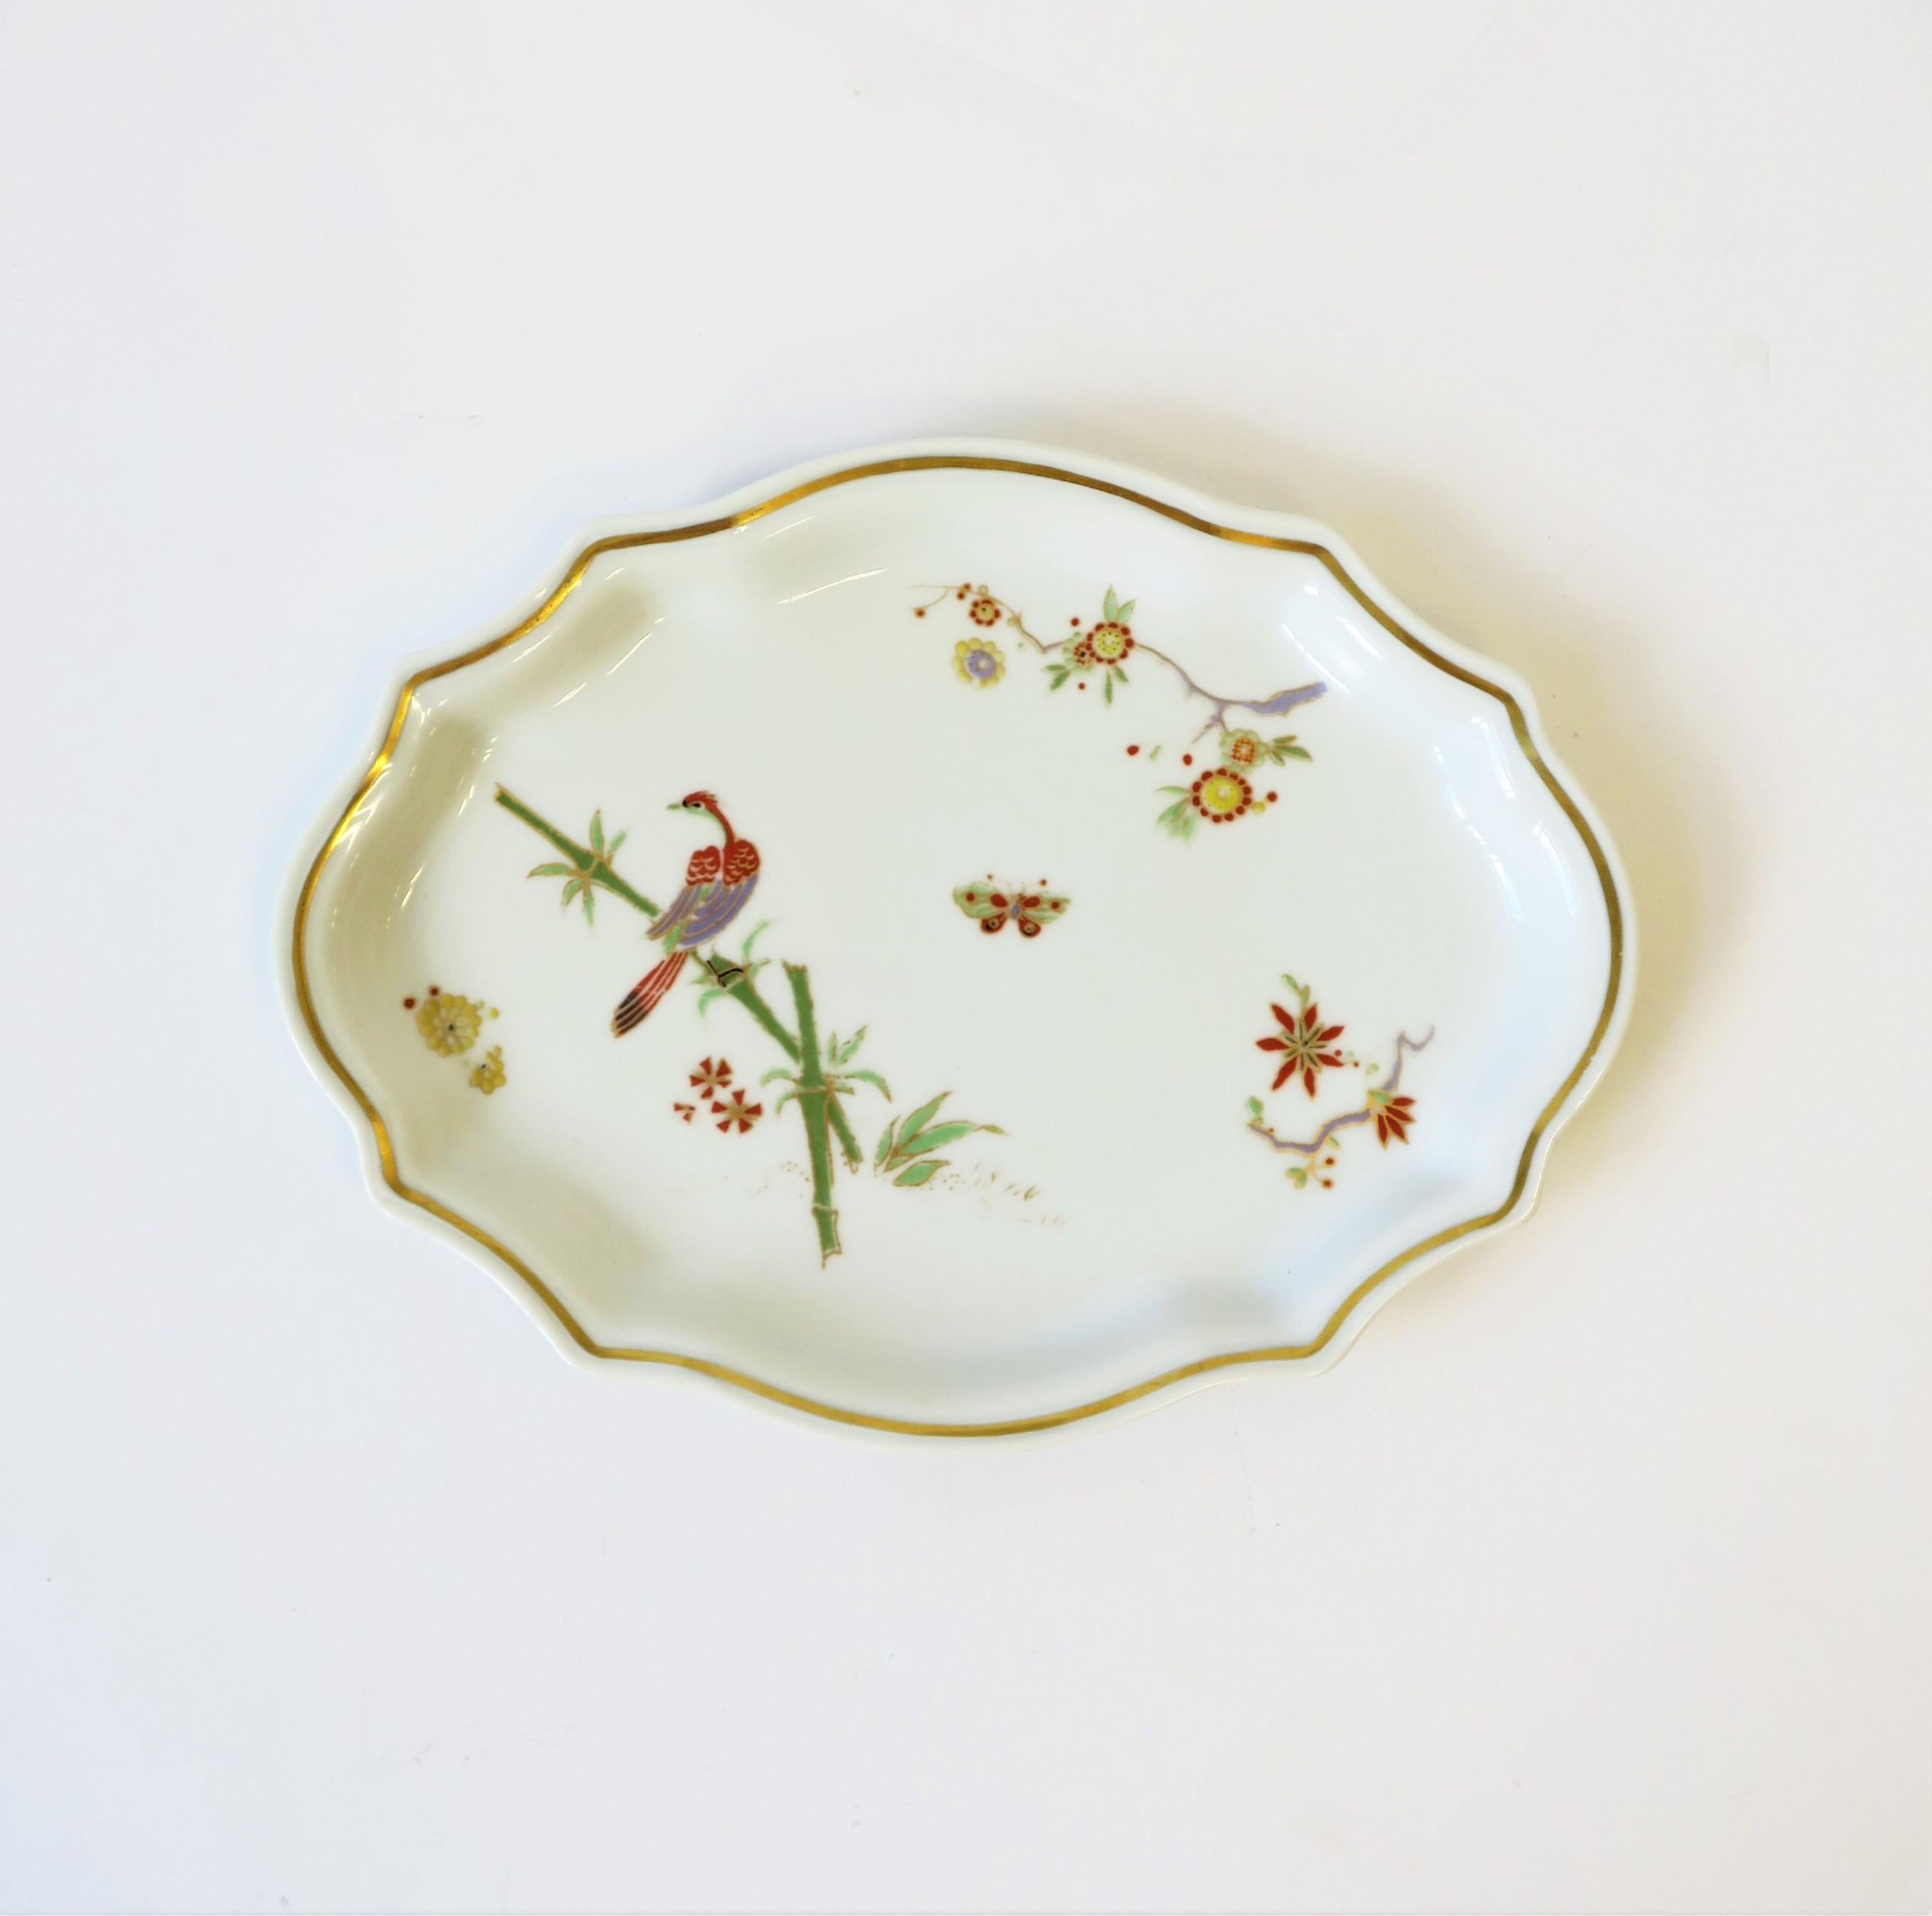 A beautiful vintage Italian white porcelain jewelry dish/plate/tray by designer Richard Ginori, circa mid-20th century, Italy. Tray vide-poche features a Phoenix parrot bird on bamboo branch/plant, small flowers, and butterfly, with a decorative